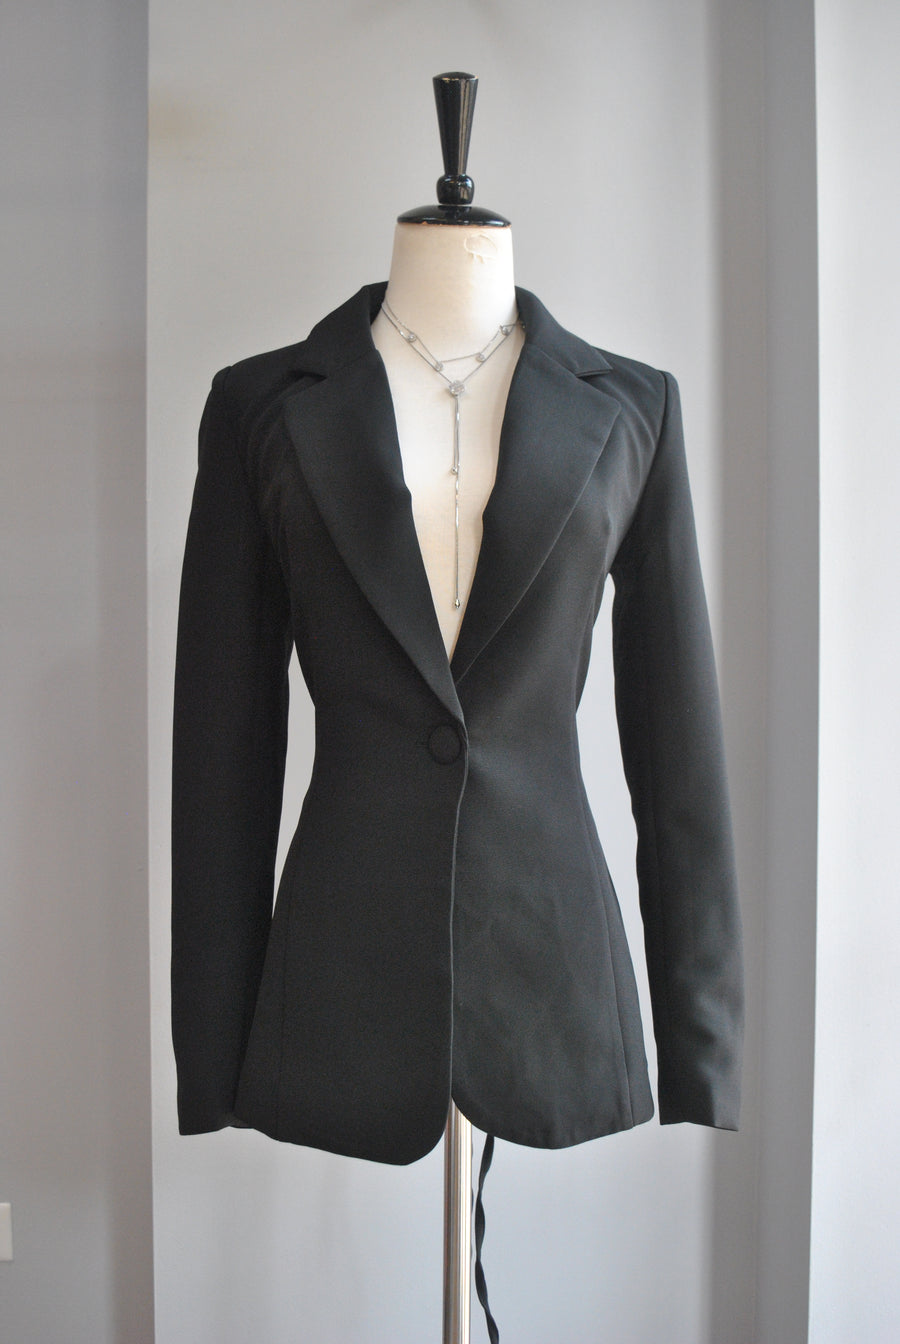 BLACK SIMPLE BLAZER WITH OPEN TIE BACK – Le Obsession Boutique